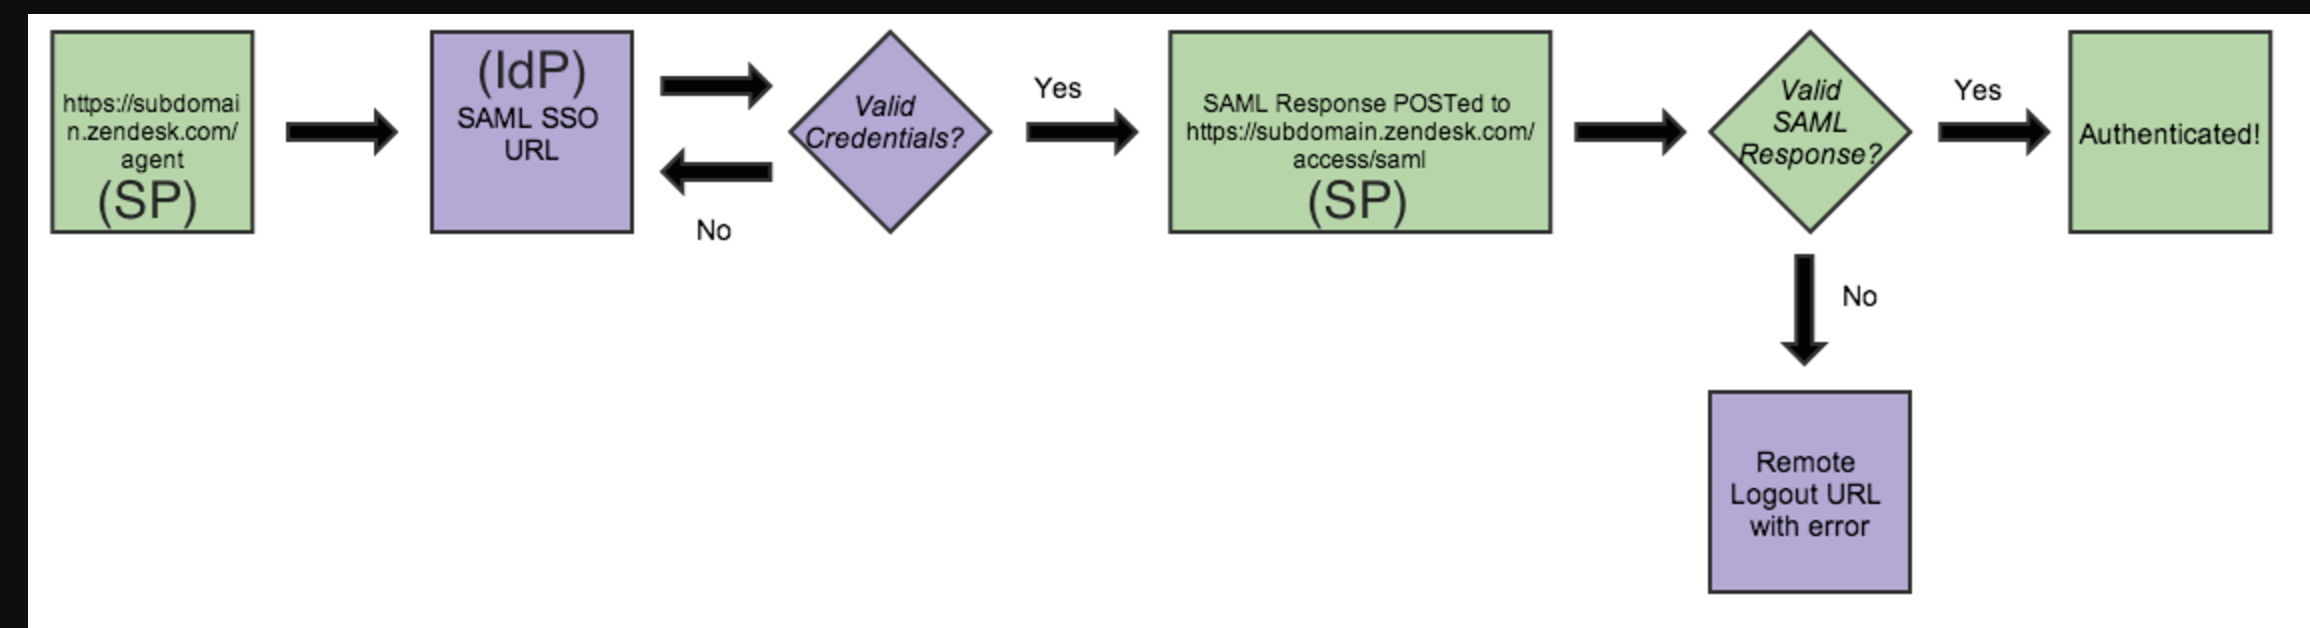 SP_Initiated_login_workflow_flow_chart.png